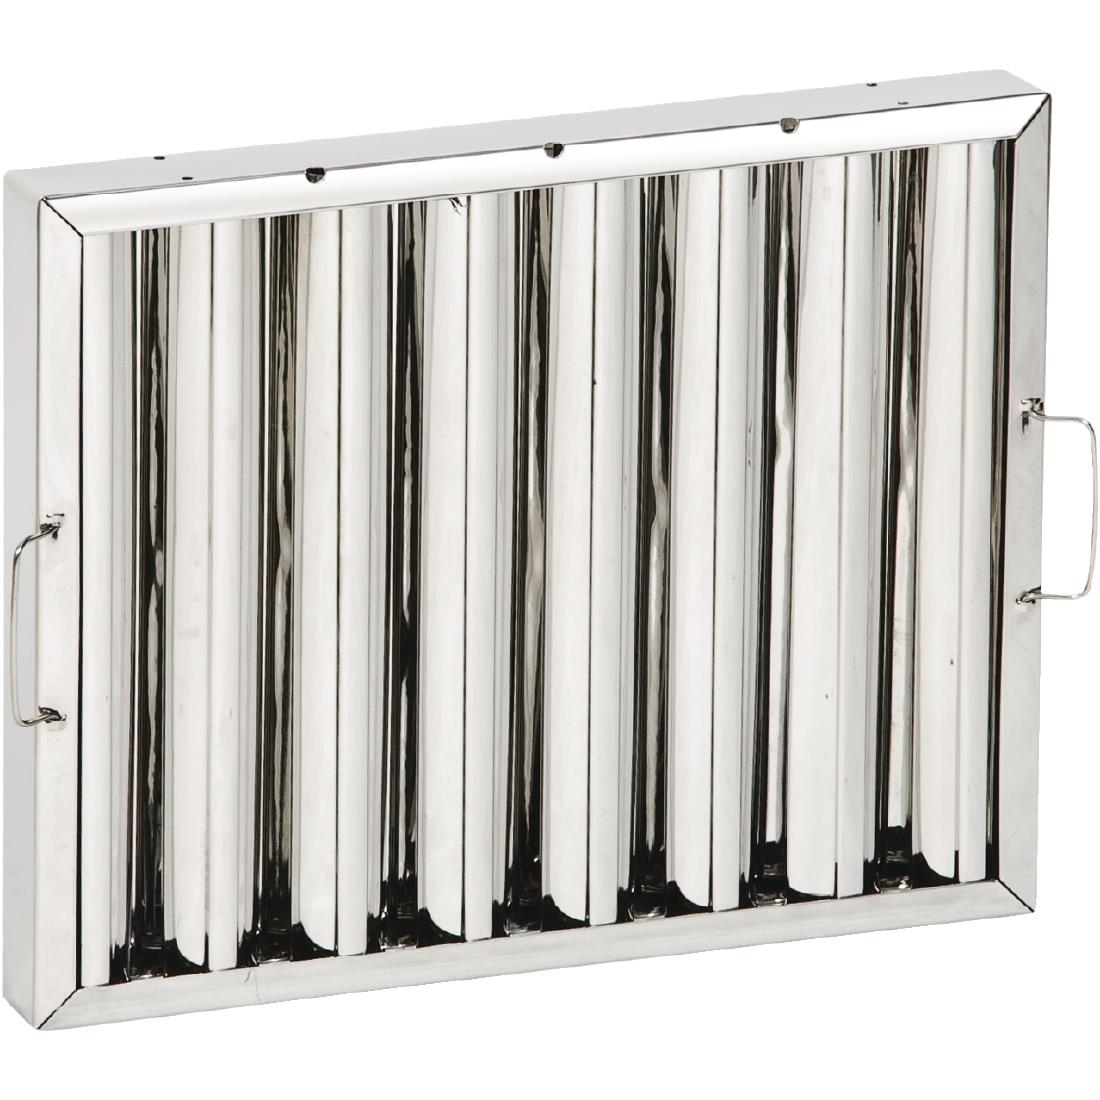 Kitchen Canopy Baffle Filter 400 x 500mm